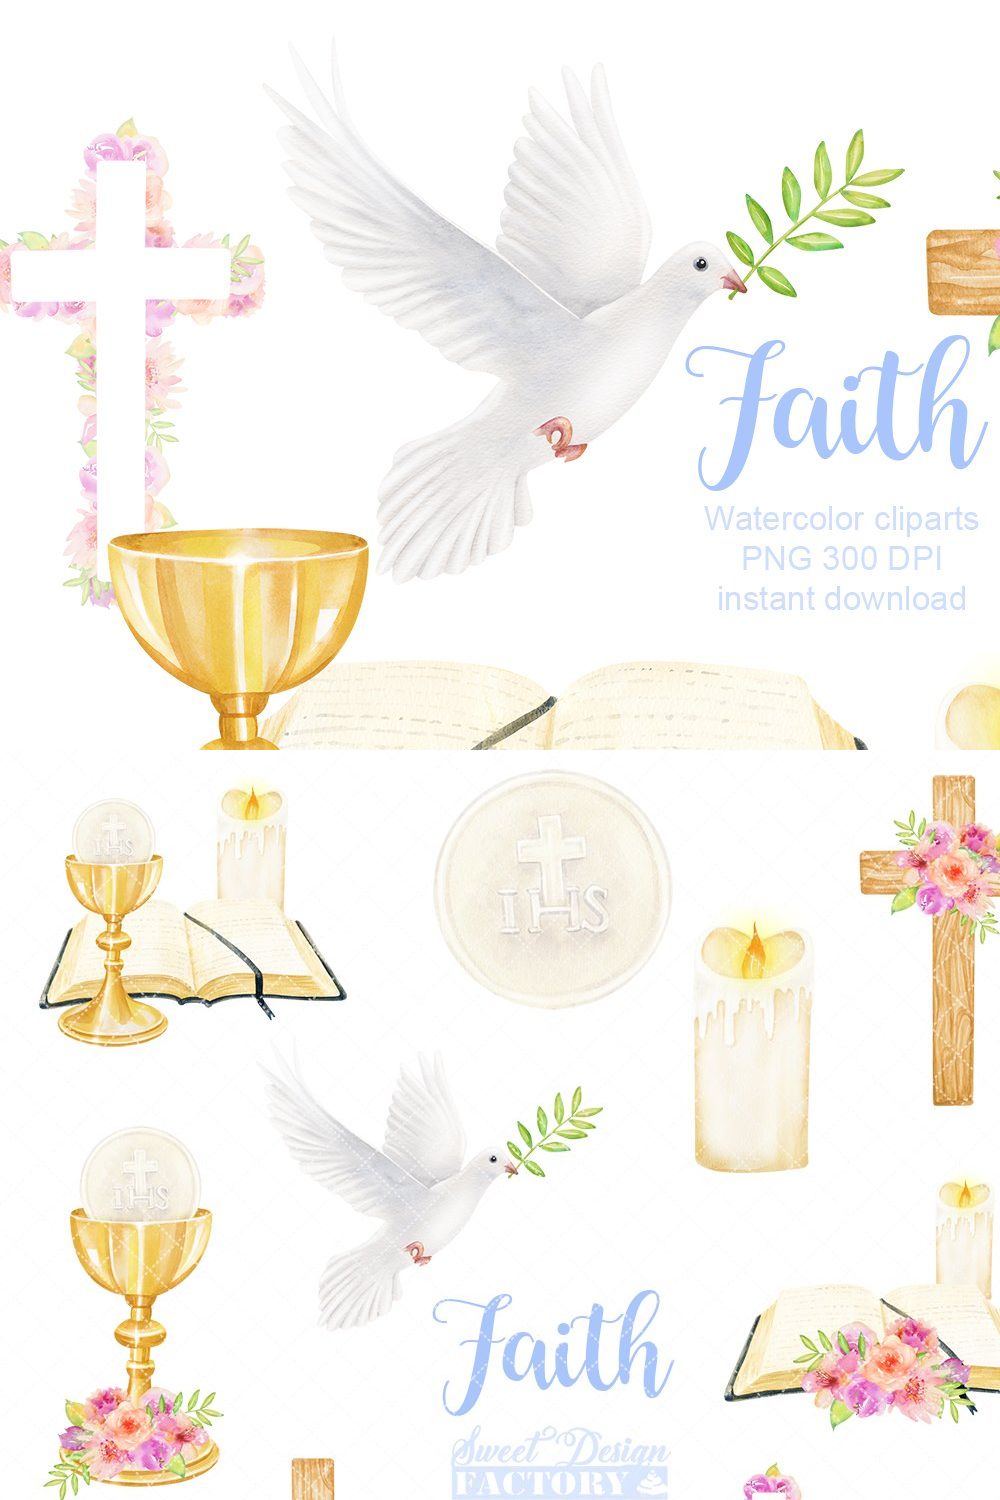 Religious icons watercolor cliparts pinterest preview image.